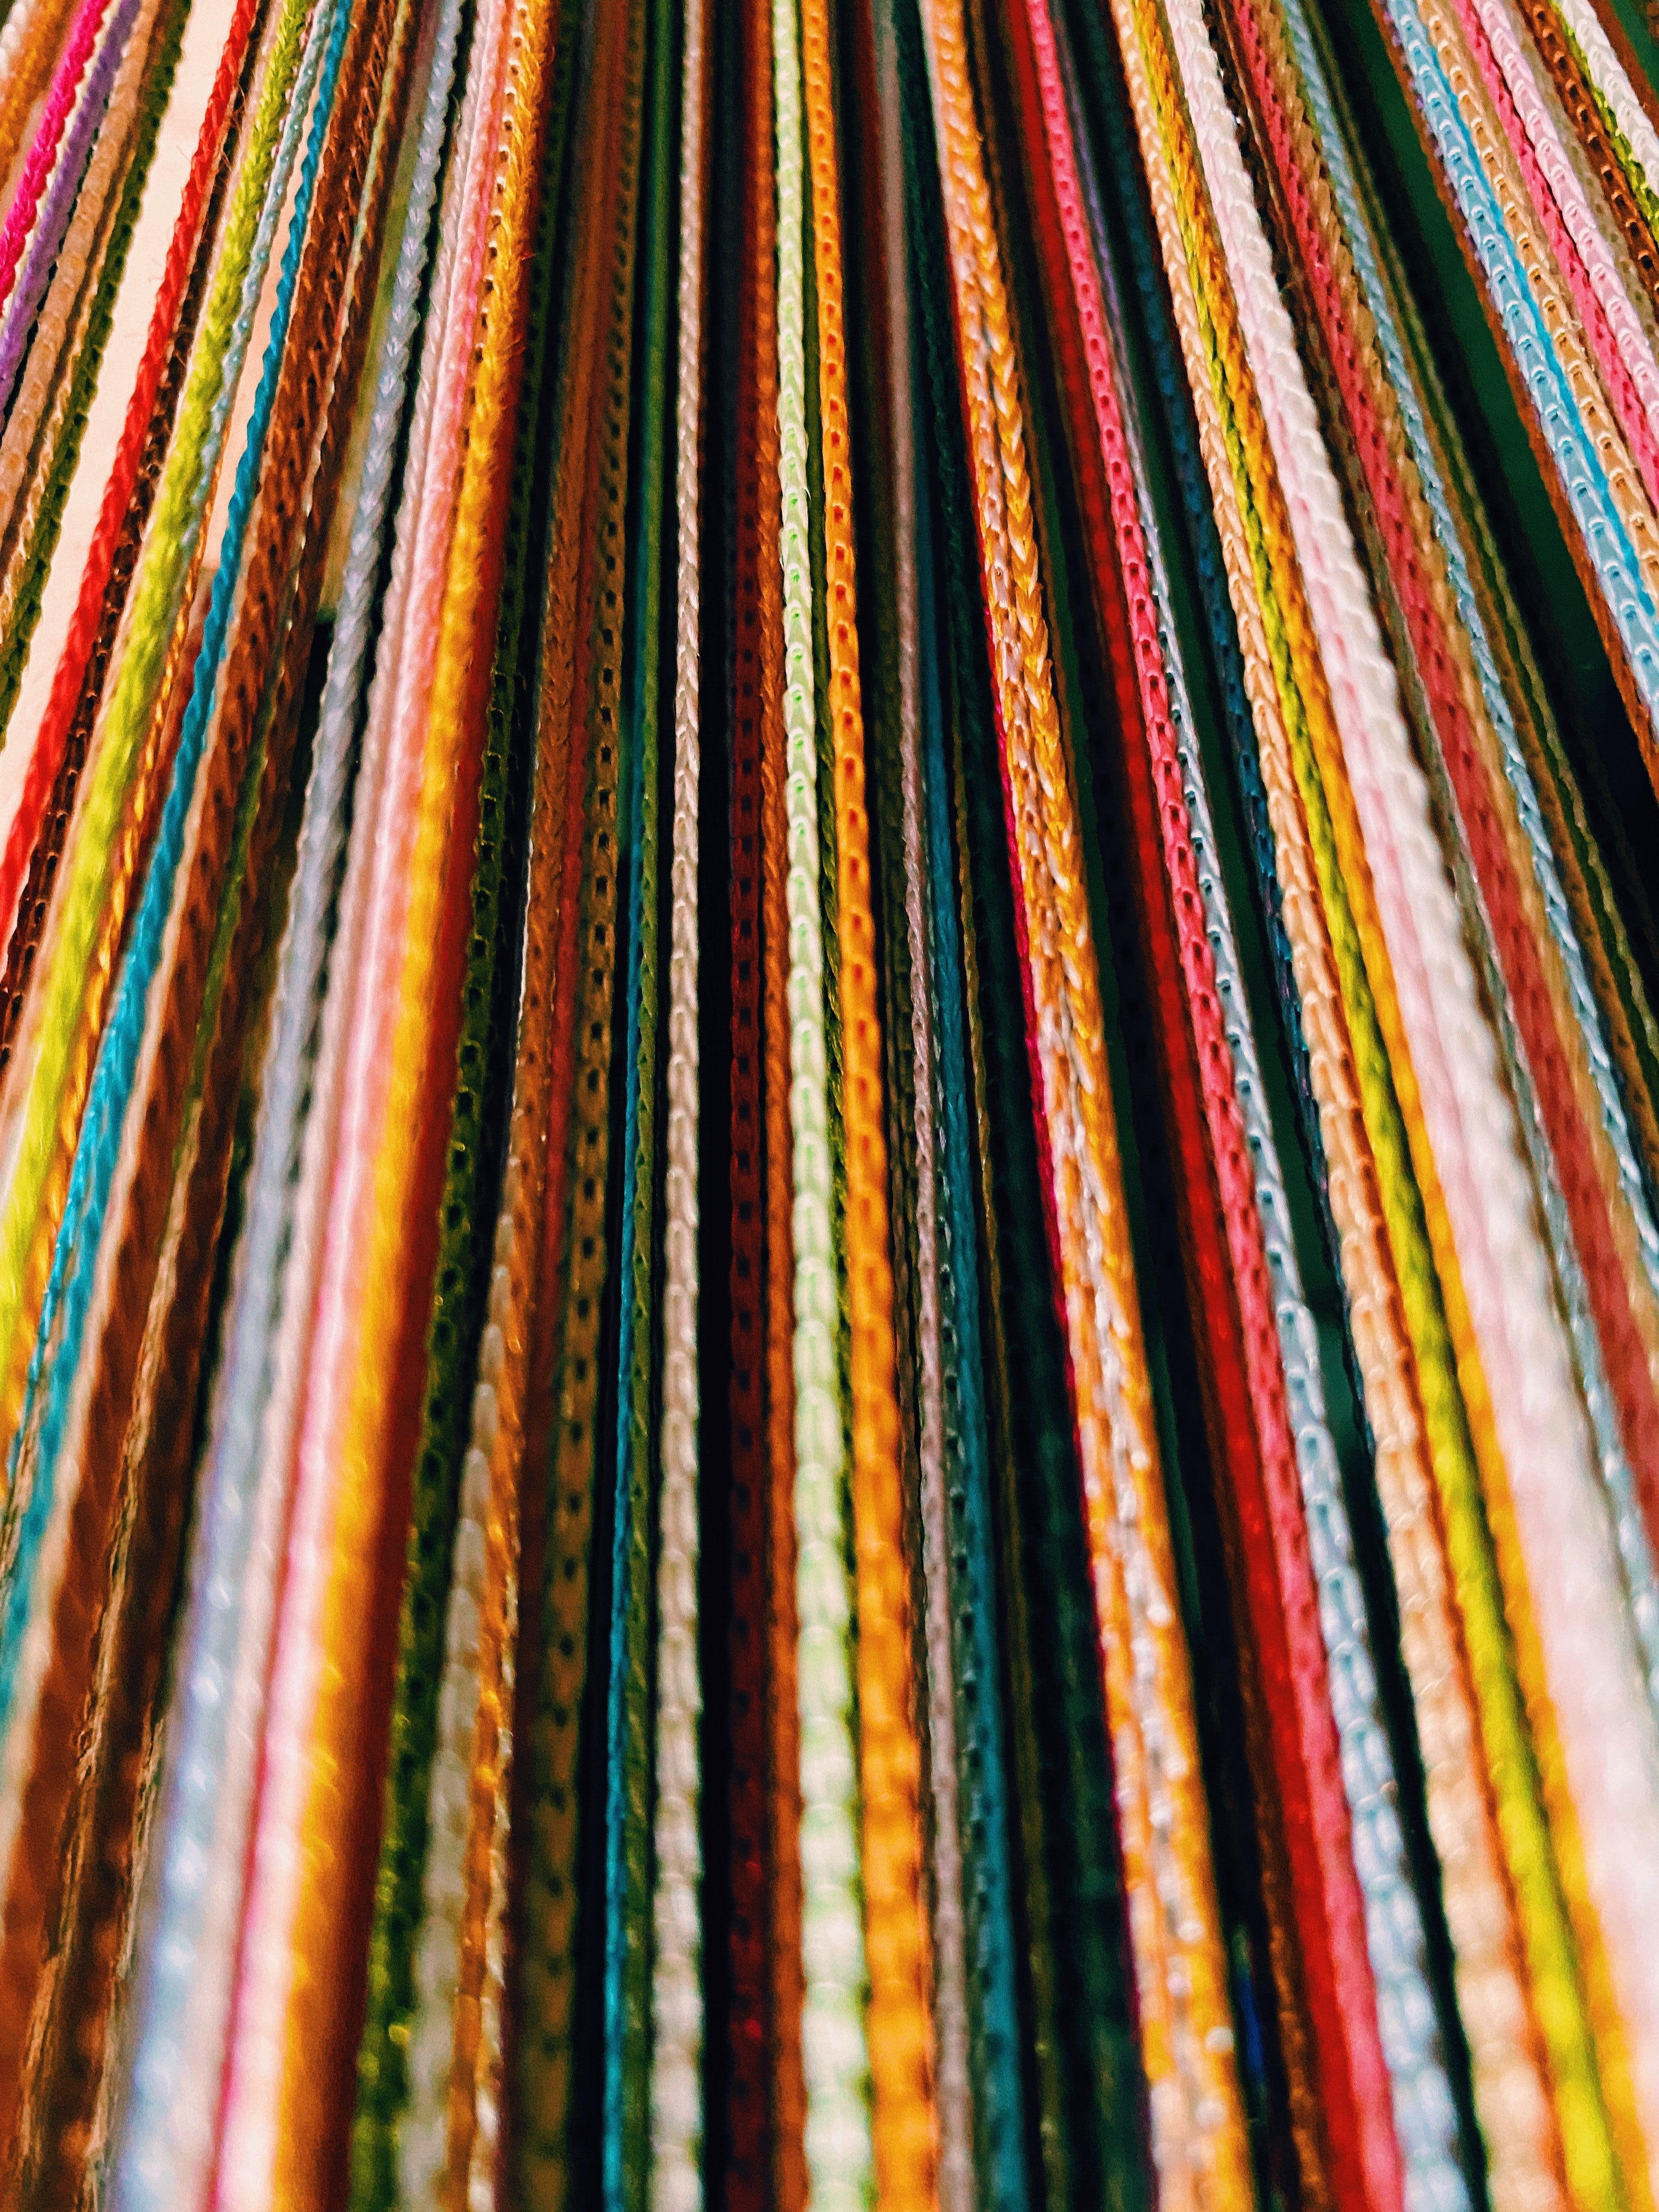 140342 Screensavers and Wallpapers Threads for phone. Download ropes, cordage, multicolored, motley, texture, textures, stripes, streaks, threads, thread pictures for free